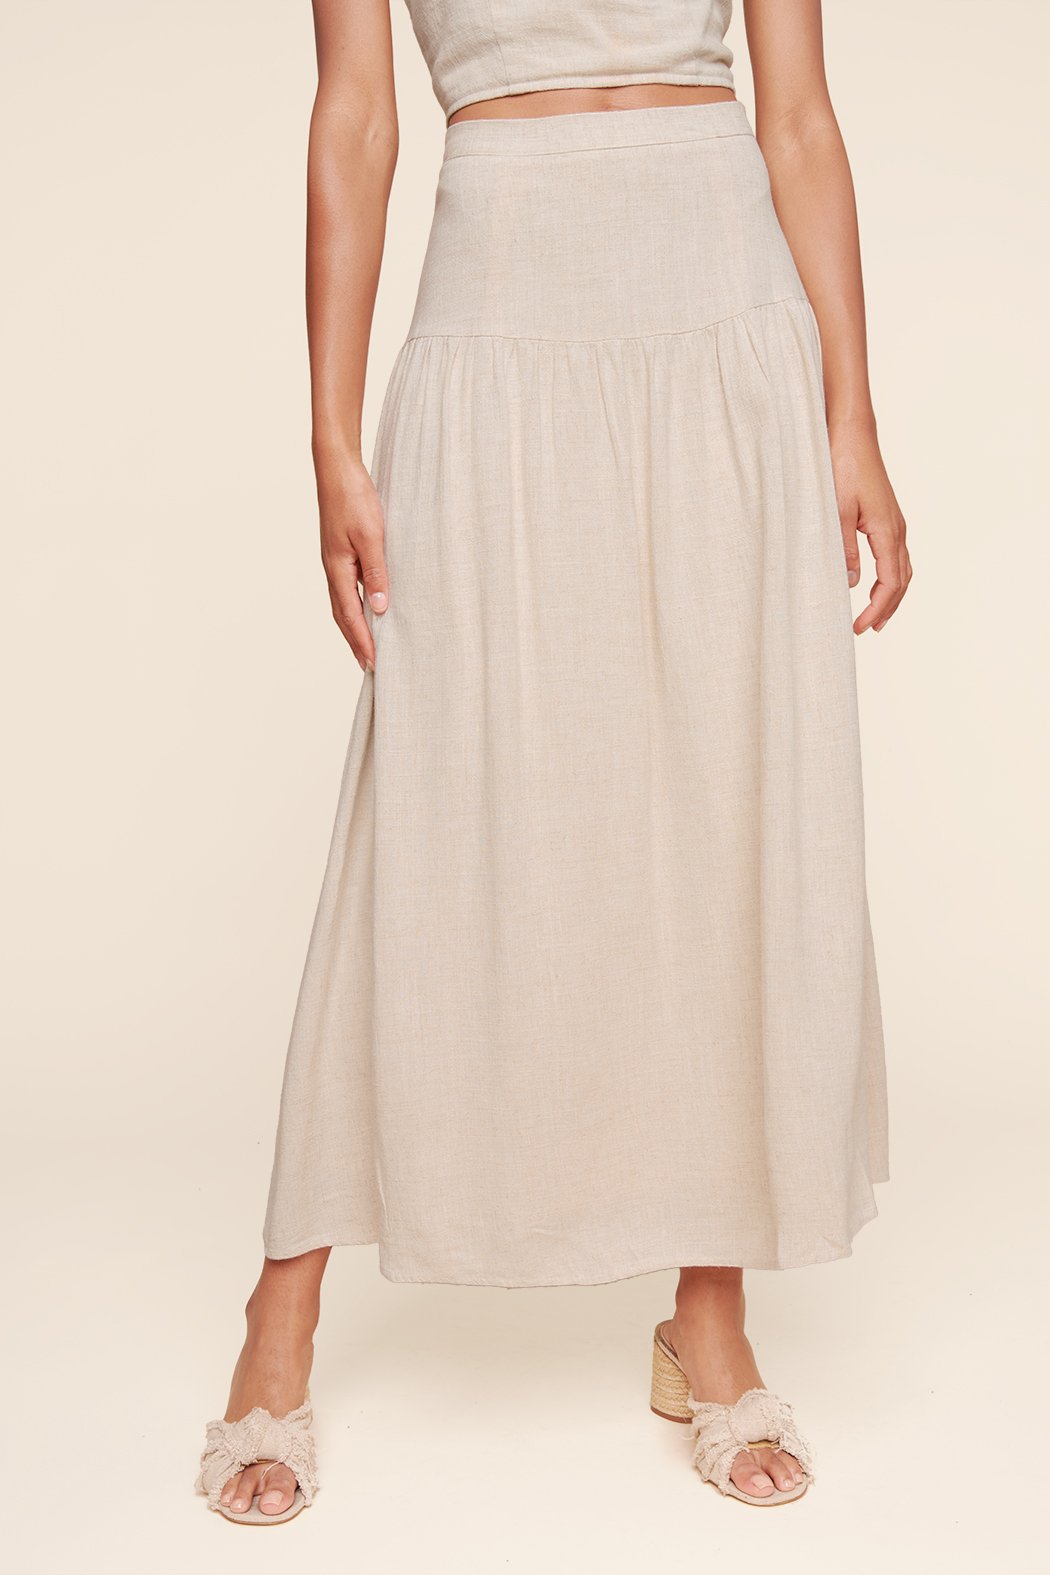 Izzy Maxi A Line Skirt – Sugarlips